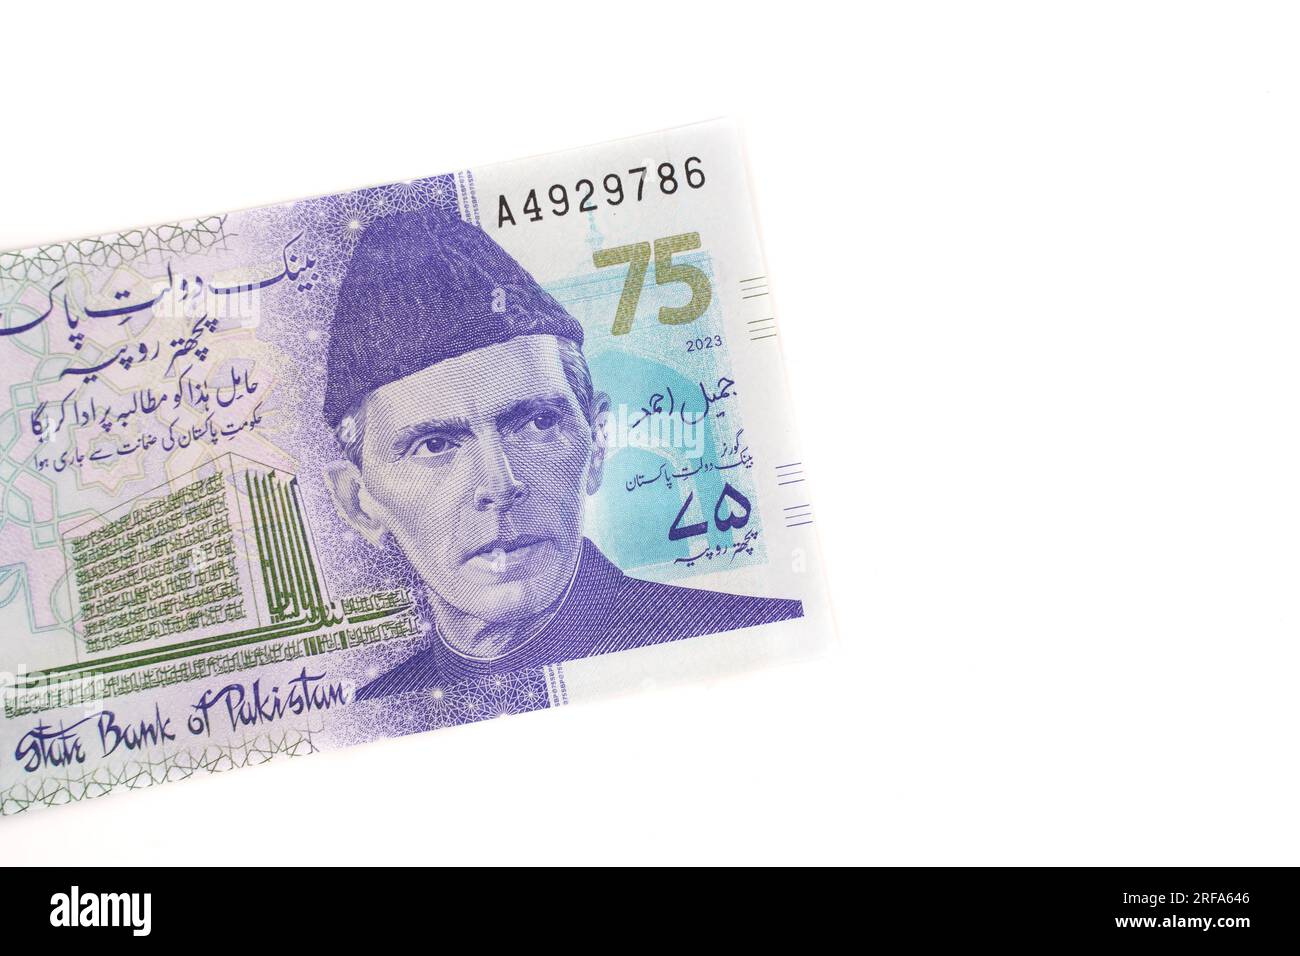 Pakistani official currency bank note of 75 rupees Stock Photo